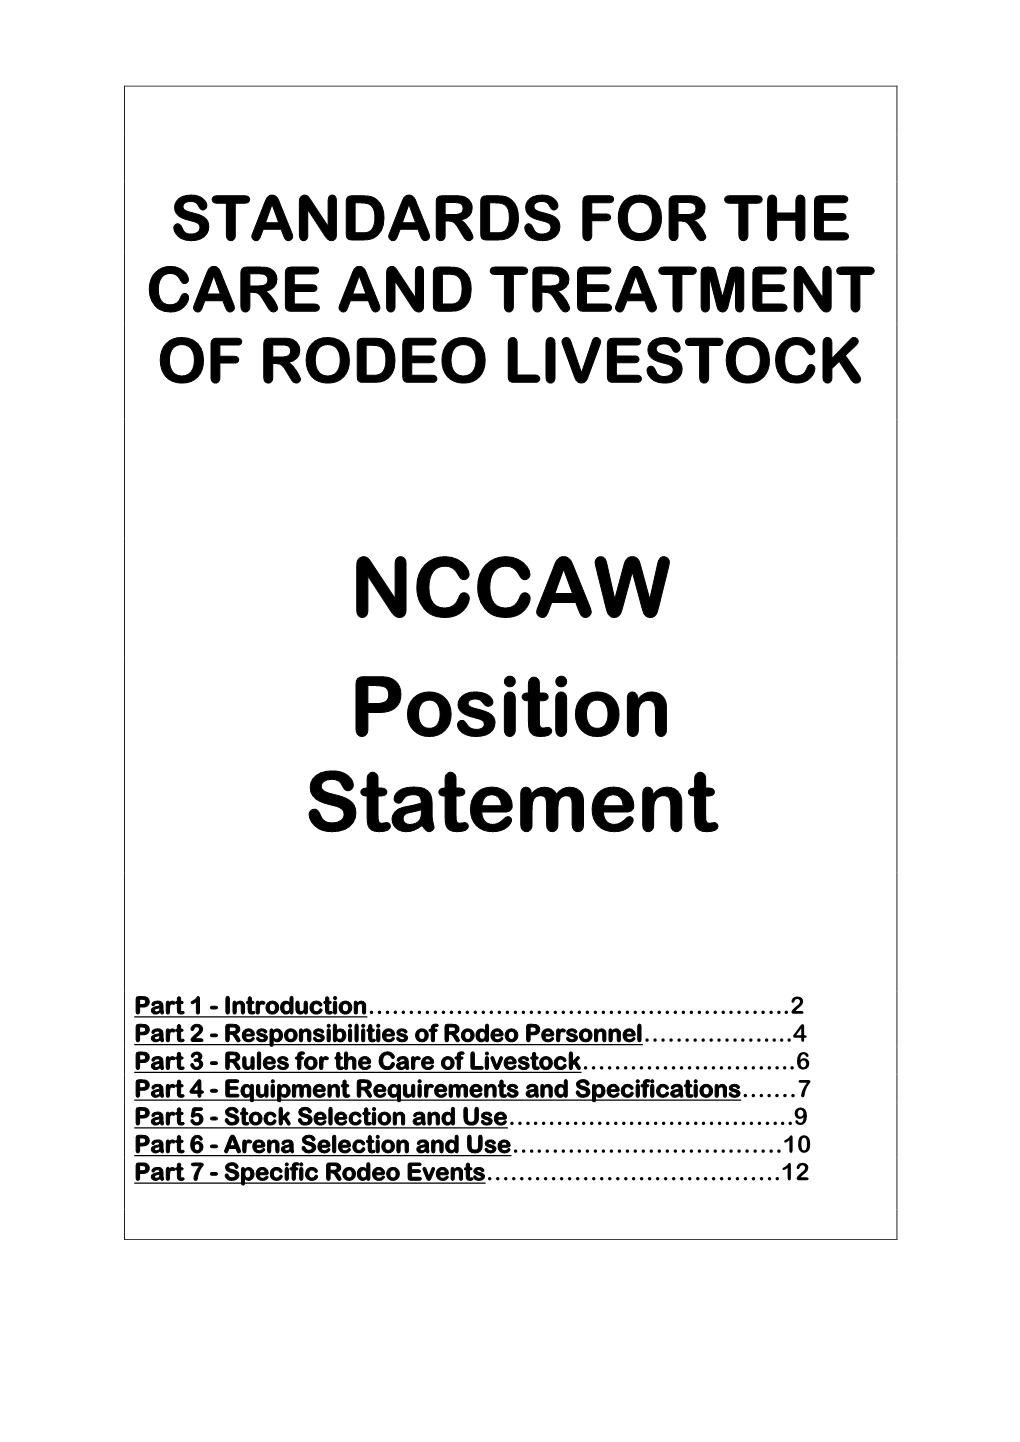 Standards for the Care and Treatment of Rodeo Livestock